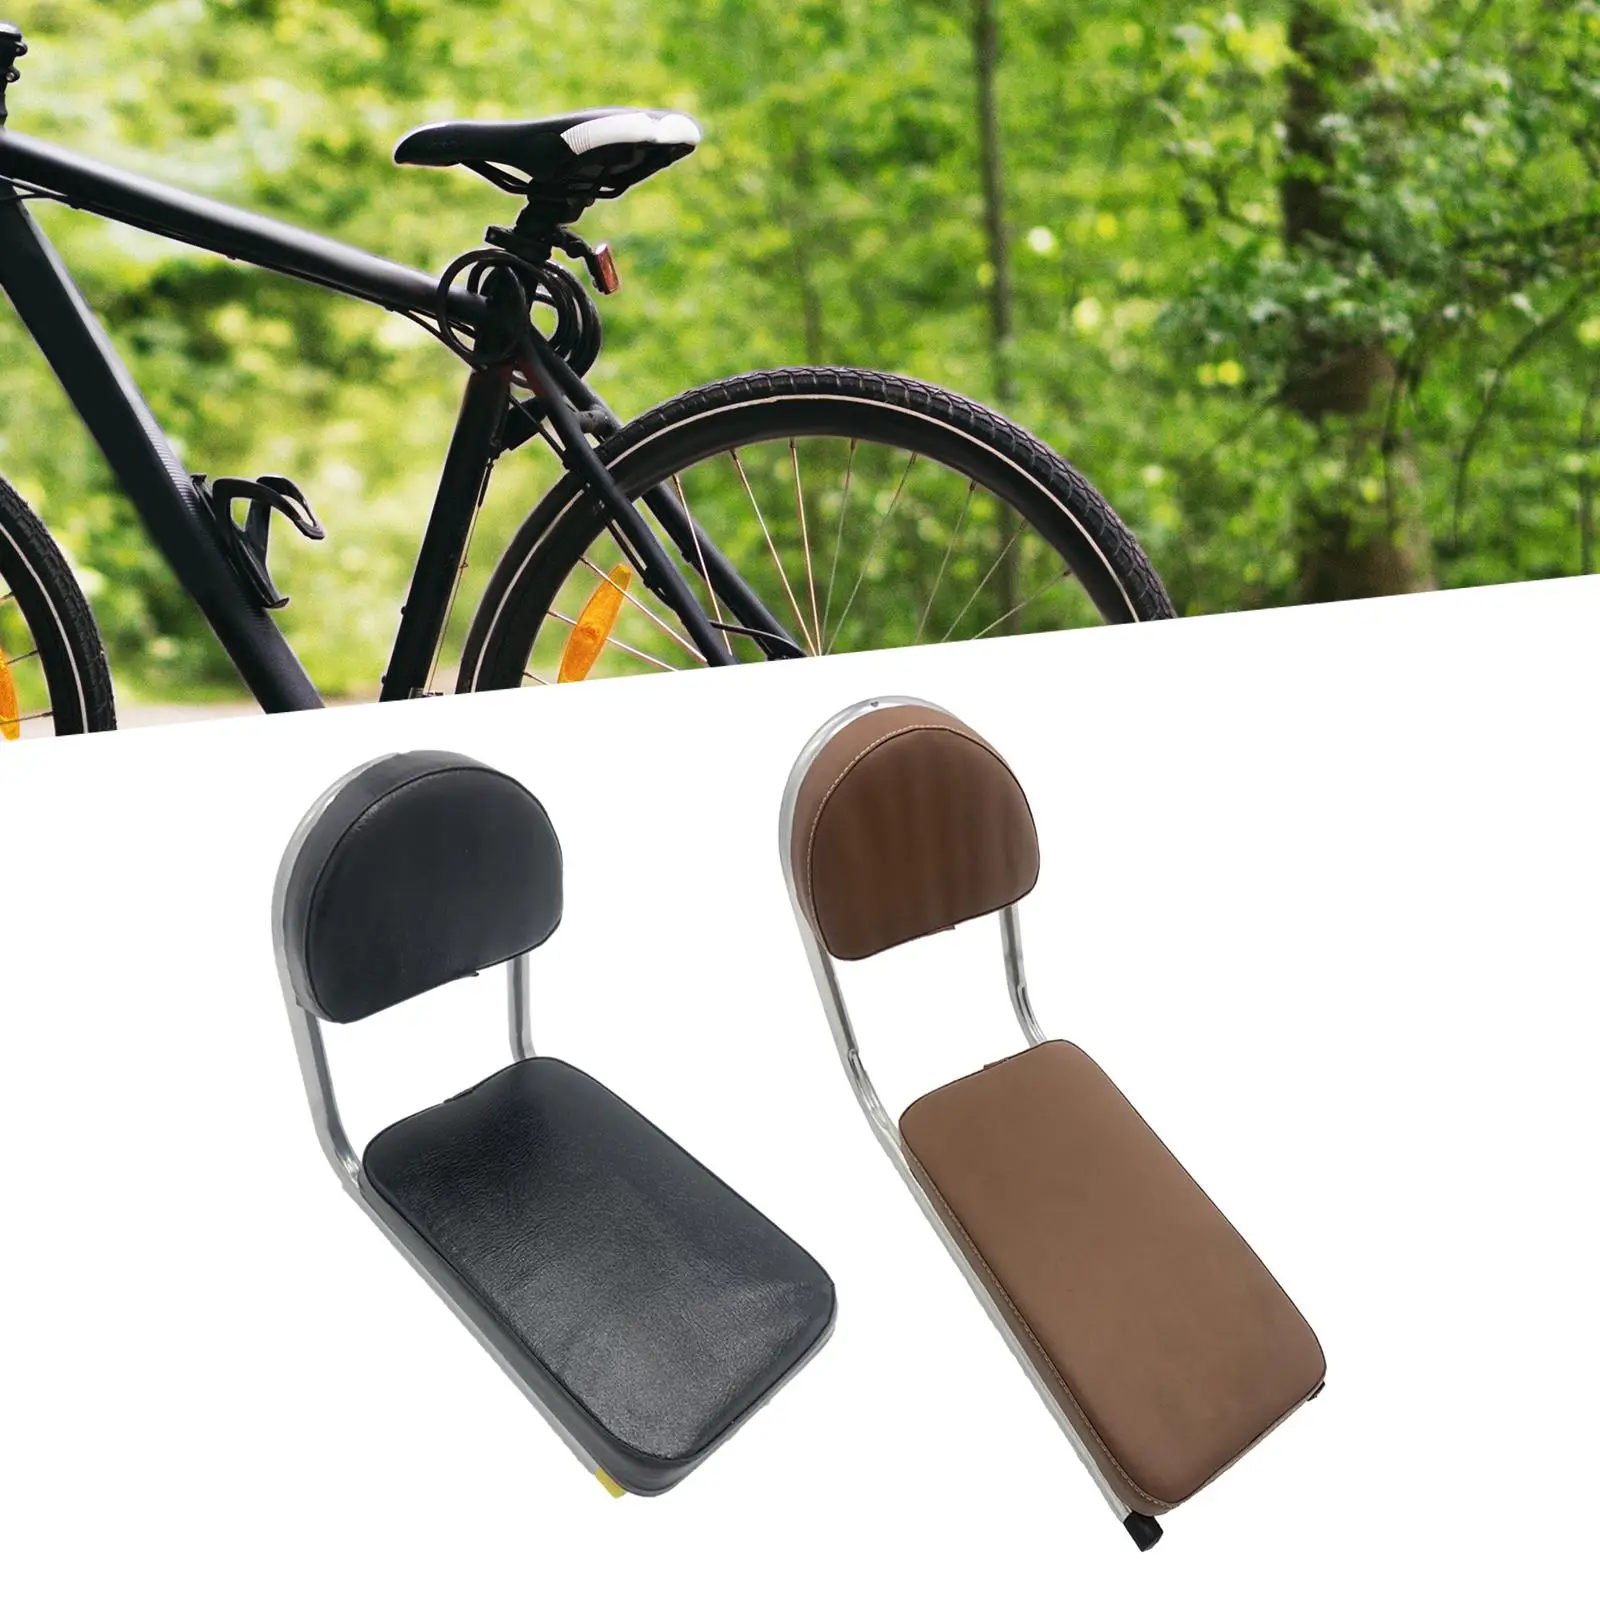 Bicycle Rear Seat Easy Cleaning PU Leather Back Saddle with Backrest Bike Back Seat for Travel Touring Riding Outdoor Accessory